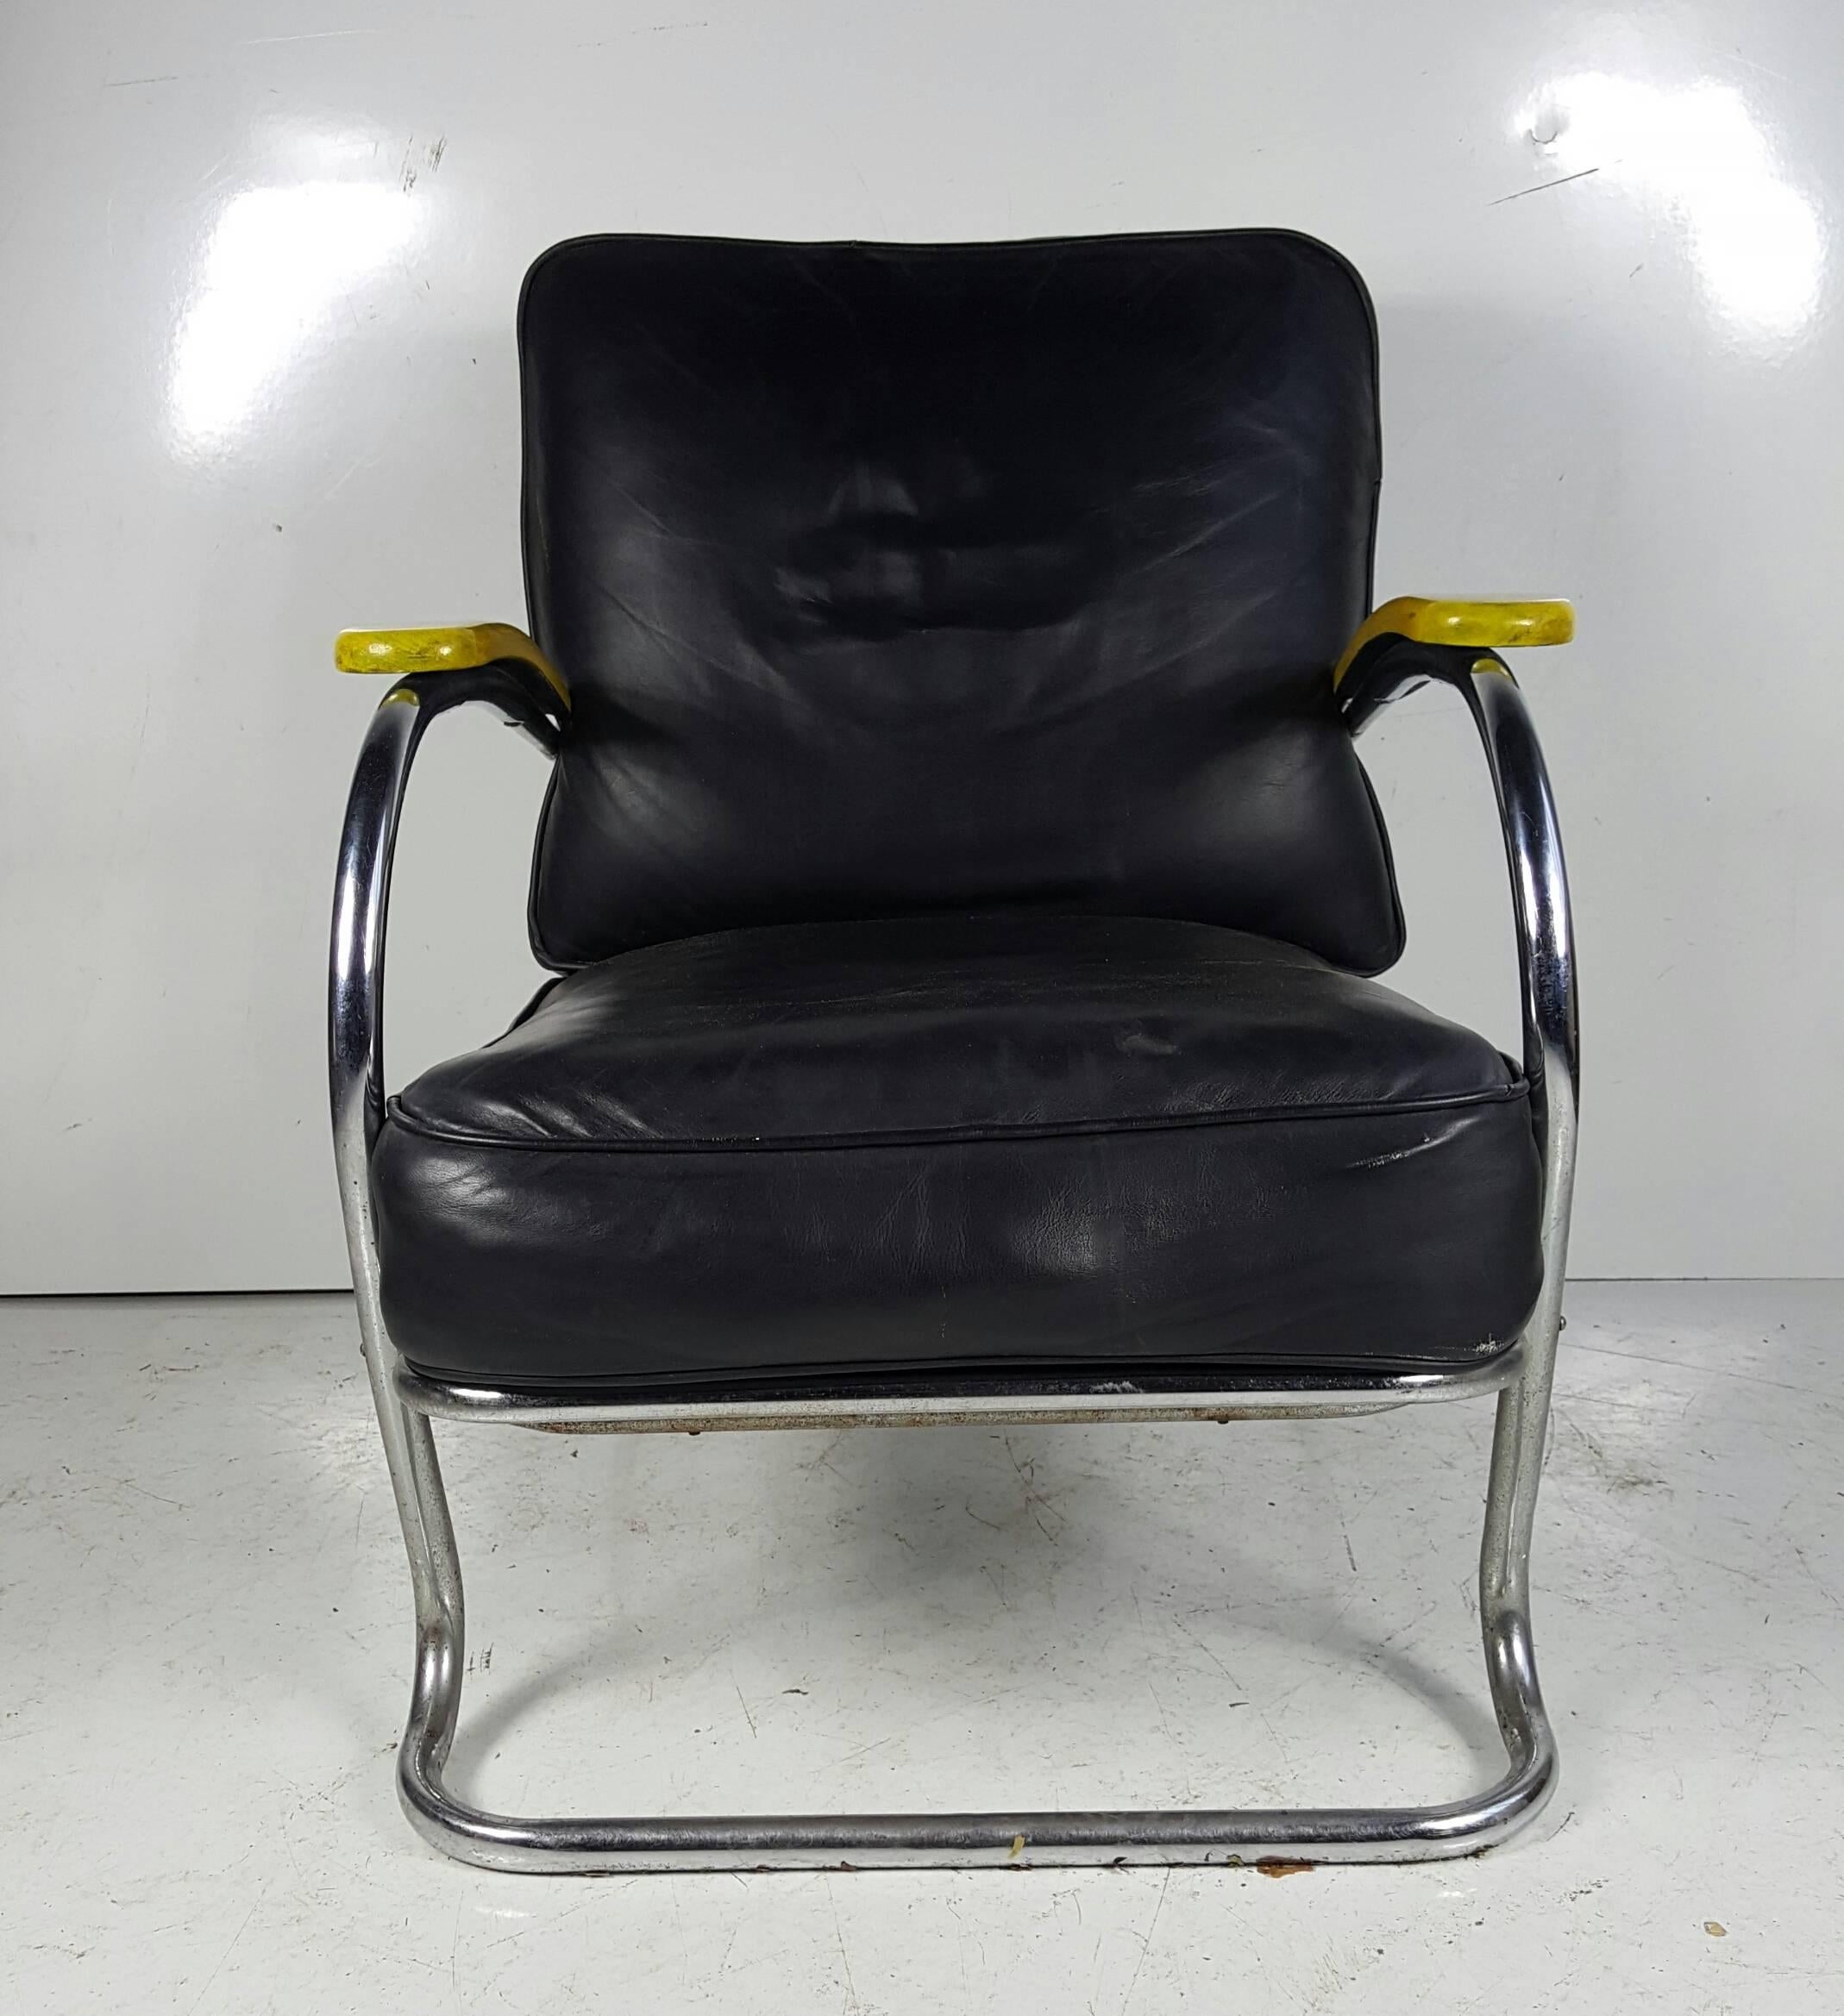 Art Deco chrome and leather KEM Webber lounge chair, circa 1930s, manufactured by LLoyd, Classic Deco design, electric yellow lacquered arms, extremely comfortable.